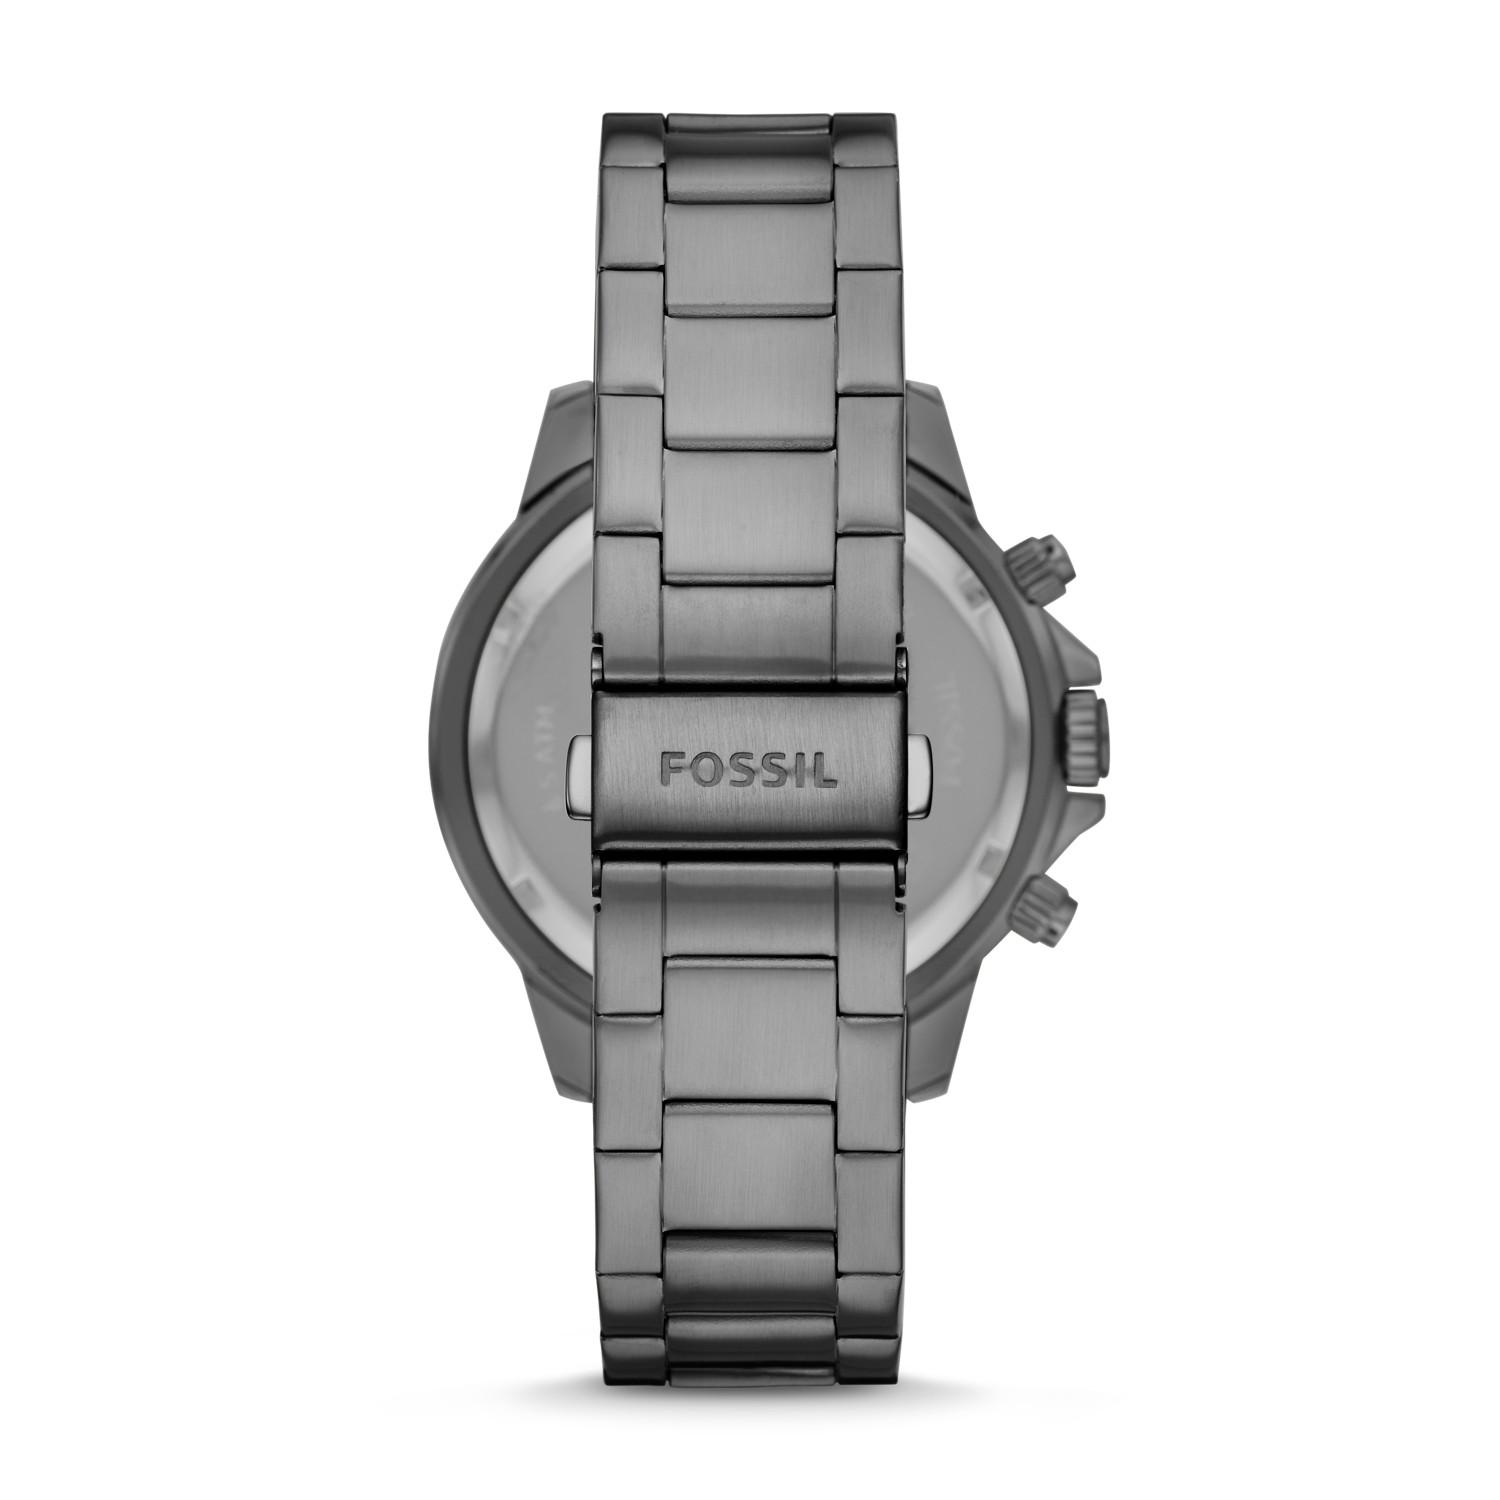 Fossil Bannon Multifunction Smoke Stainless Steel Watch Jewelry in Gray Bannon Multifunction Smoke Stainless Steel Watch